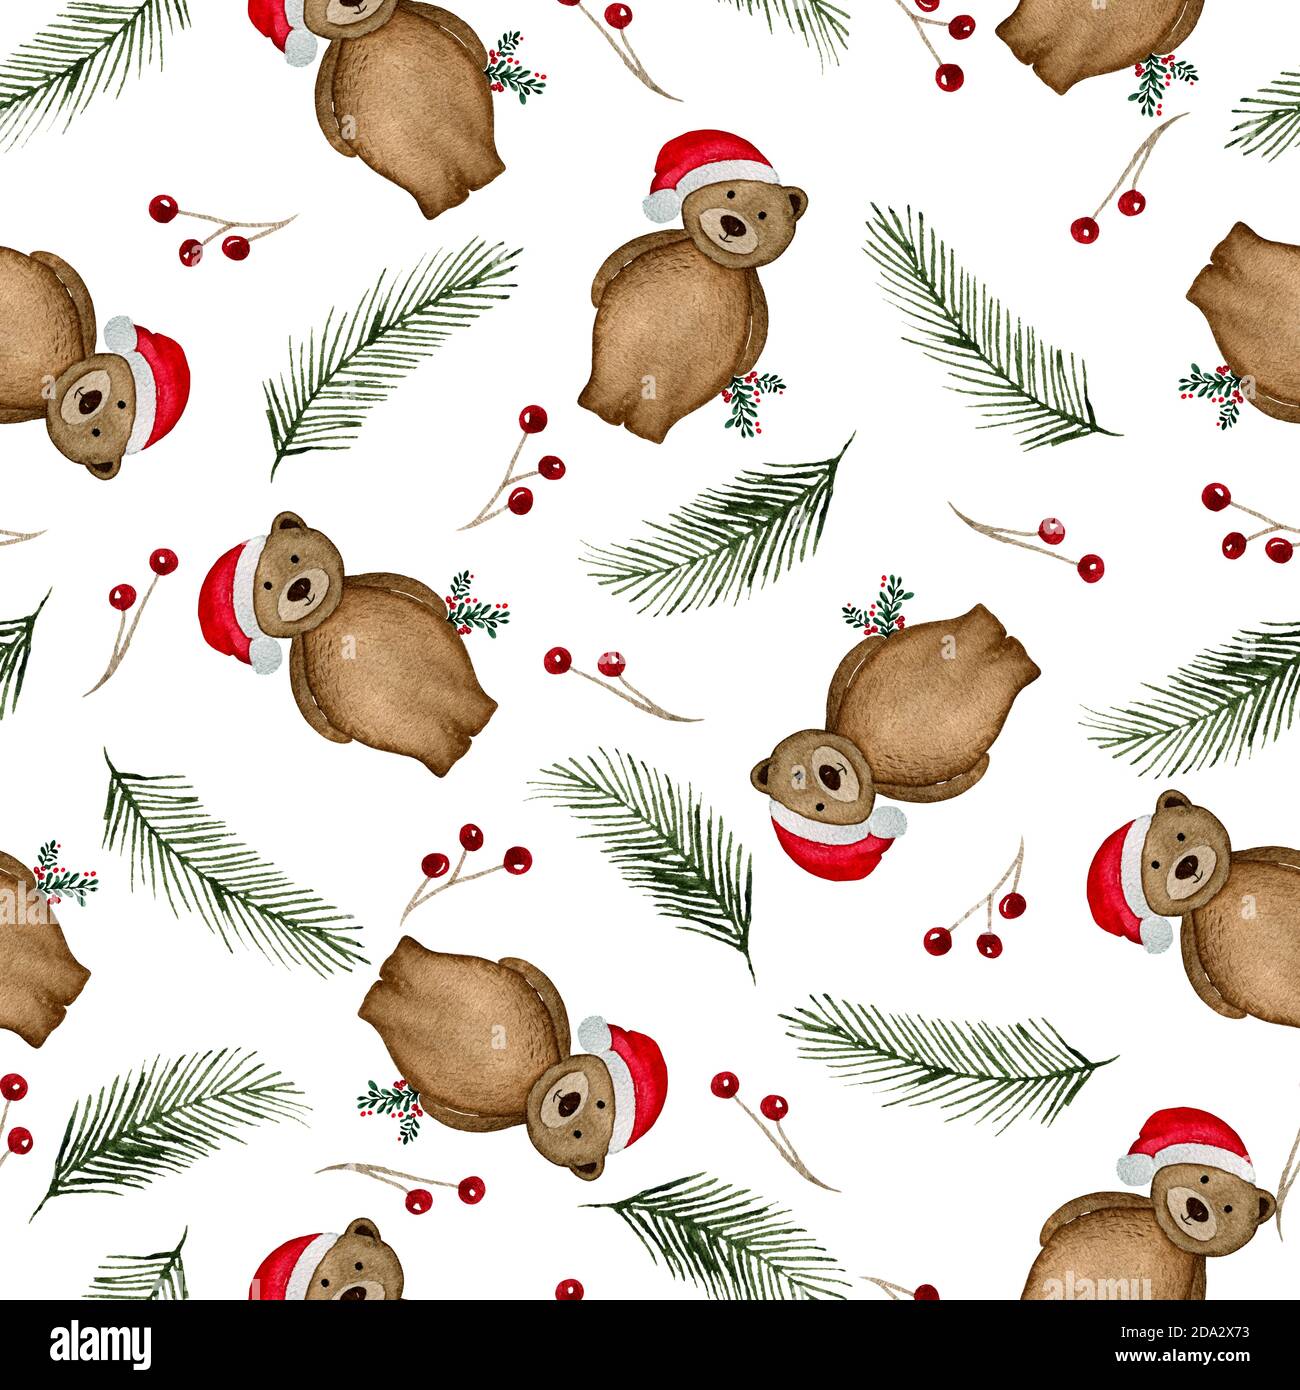 Christmas holiday background, seamless repeat pattern with watercolor Christmas  teddy bear, fir tree and berries, cartoon Christmas and winter holiday  Stock Photo - Alamy